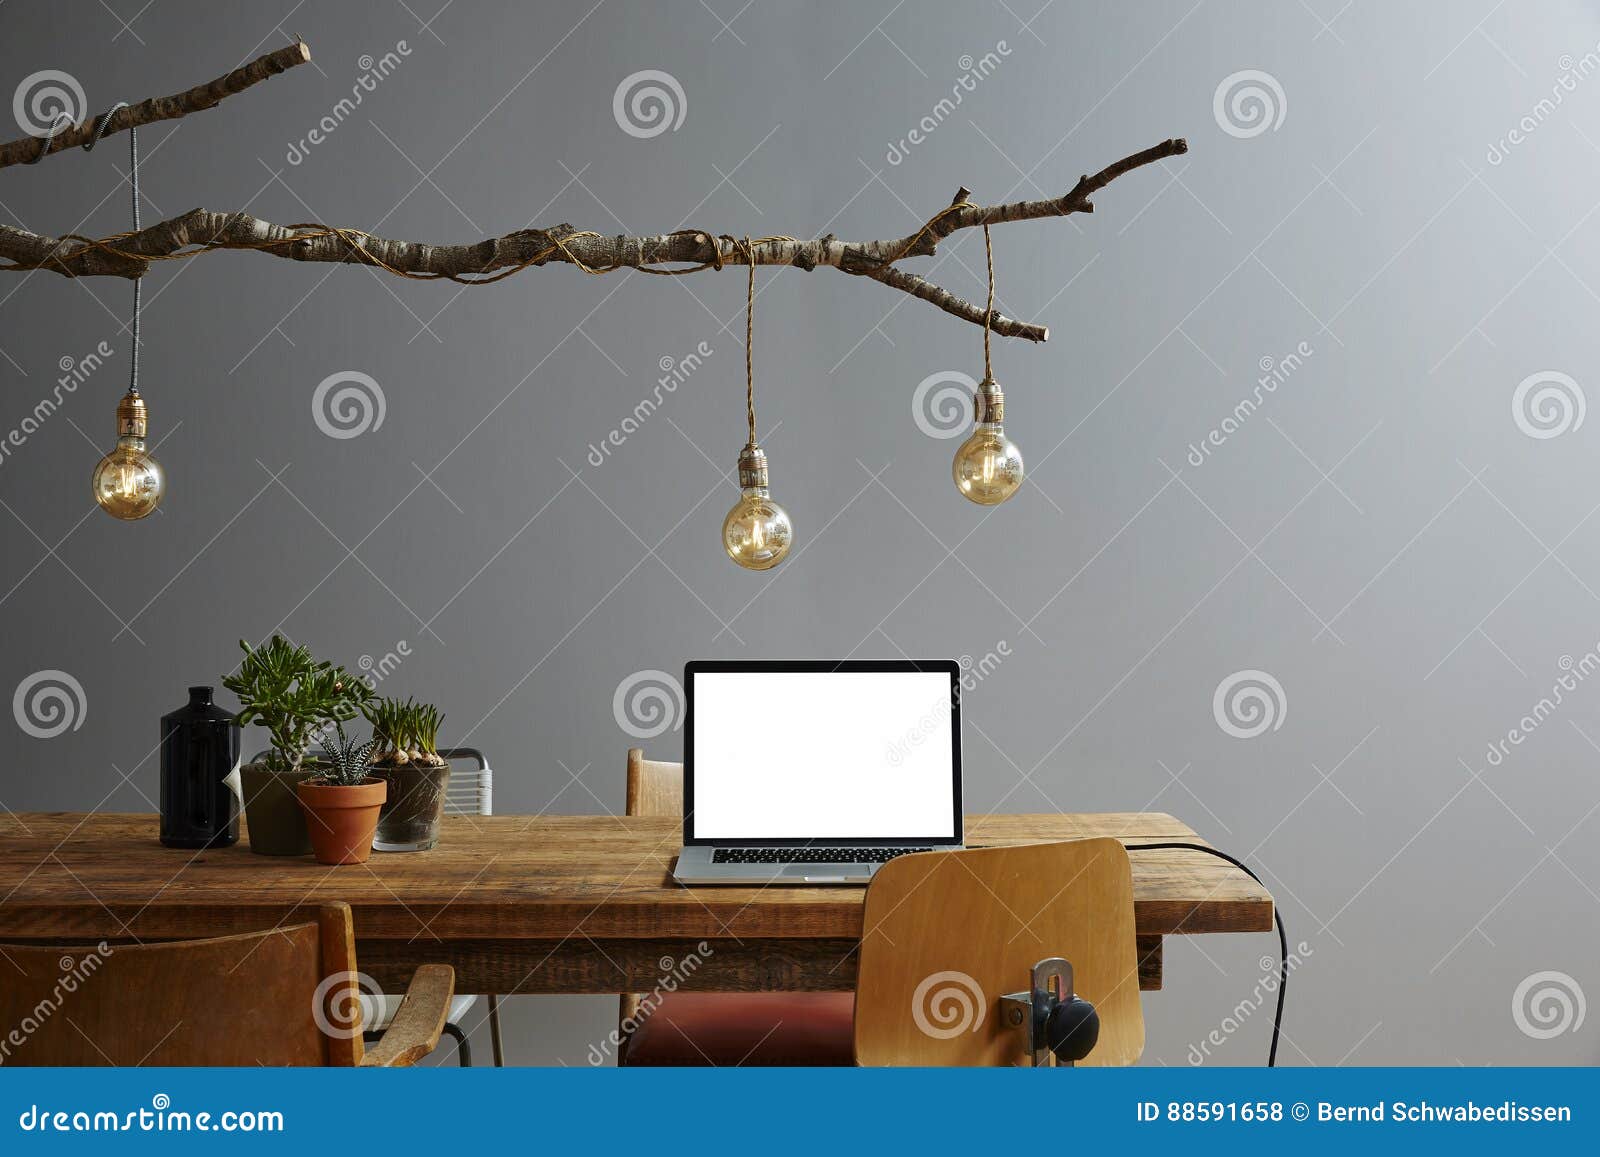 Working In A Modern Environment Lifestyle Interior Laptop Stock